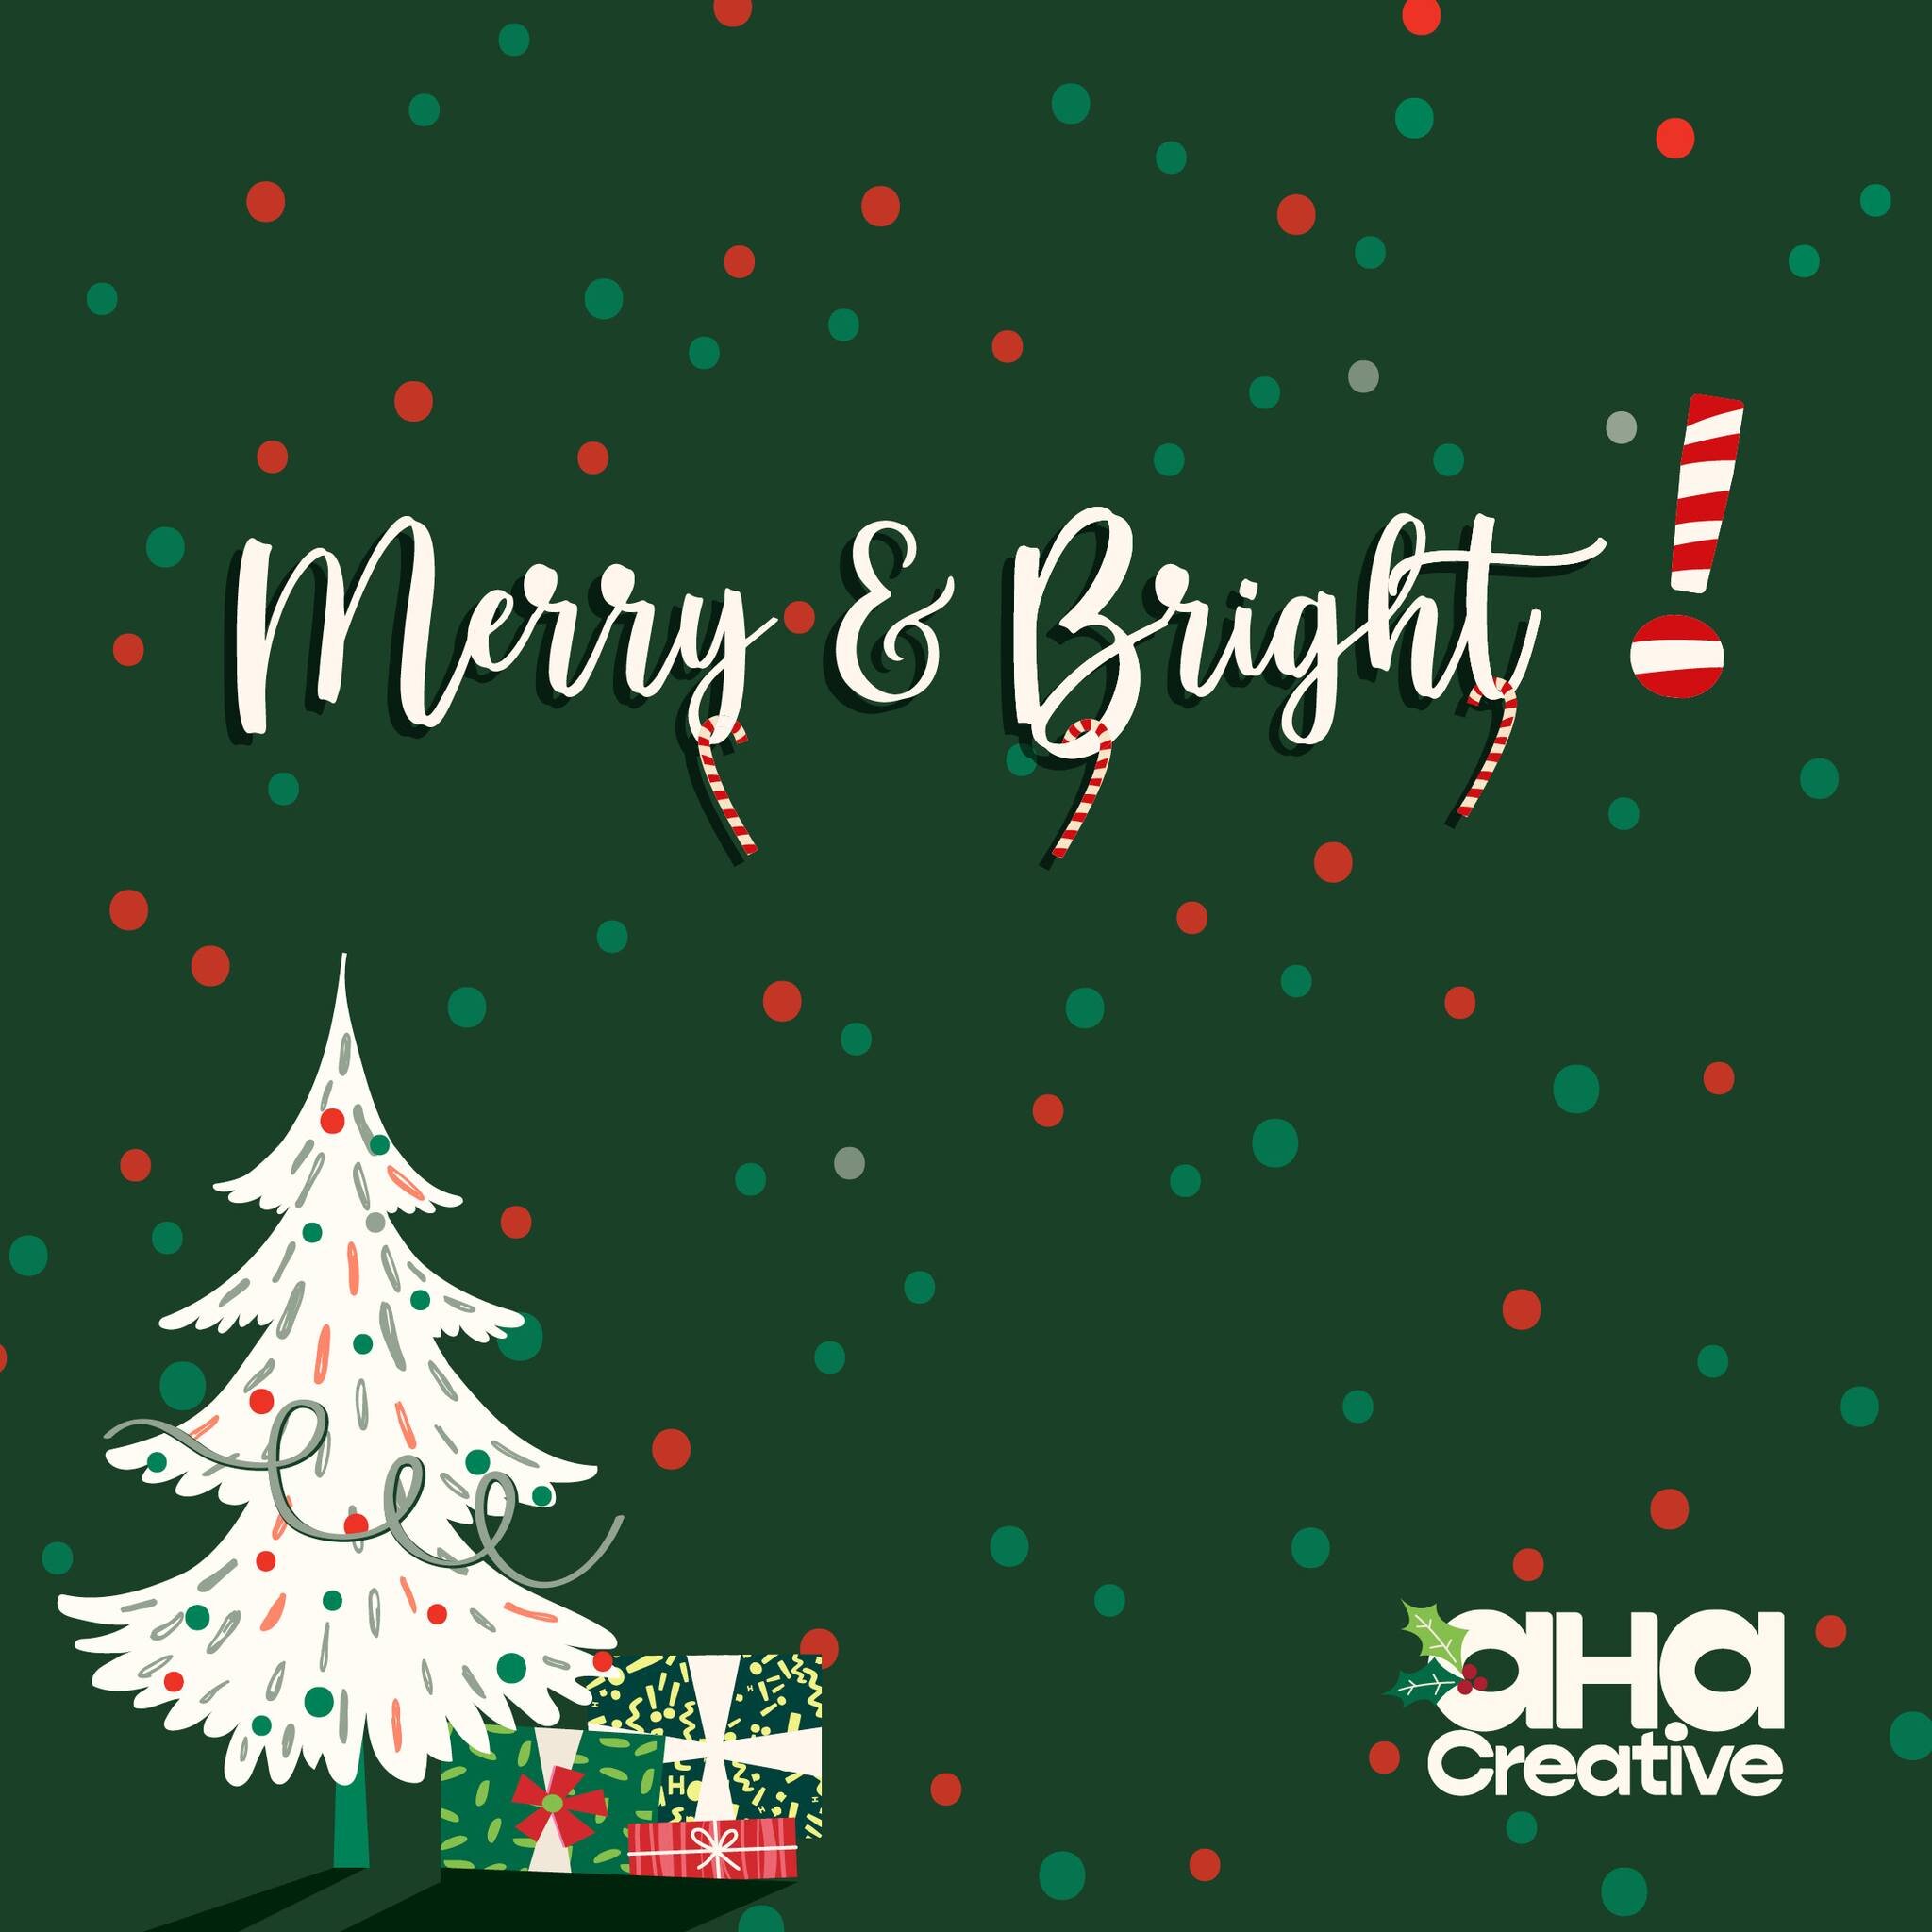 Wishing you and yours a safe and Happy Holidays, however you choose to celebrate. I'm taking a break for a couple of weeks but will be back in 2024 with more aha designs! #MerryChristmas #christmasdesign #merryandbright